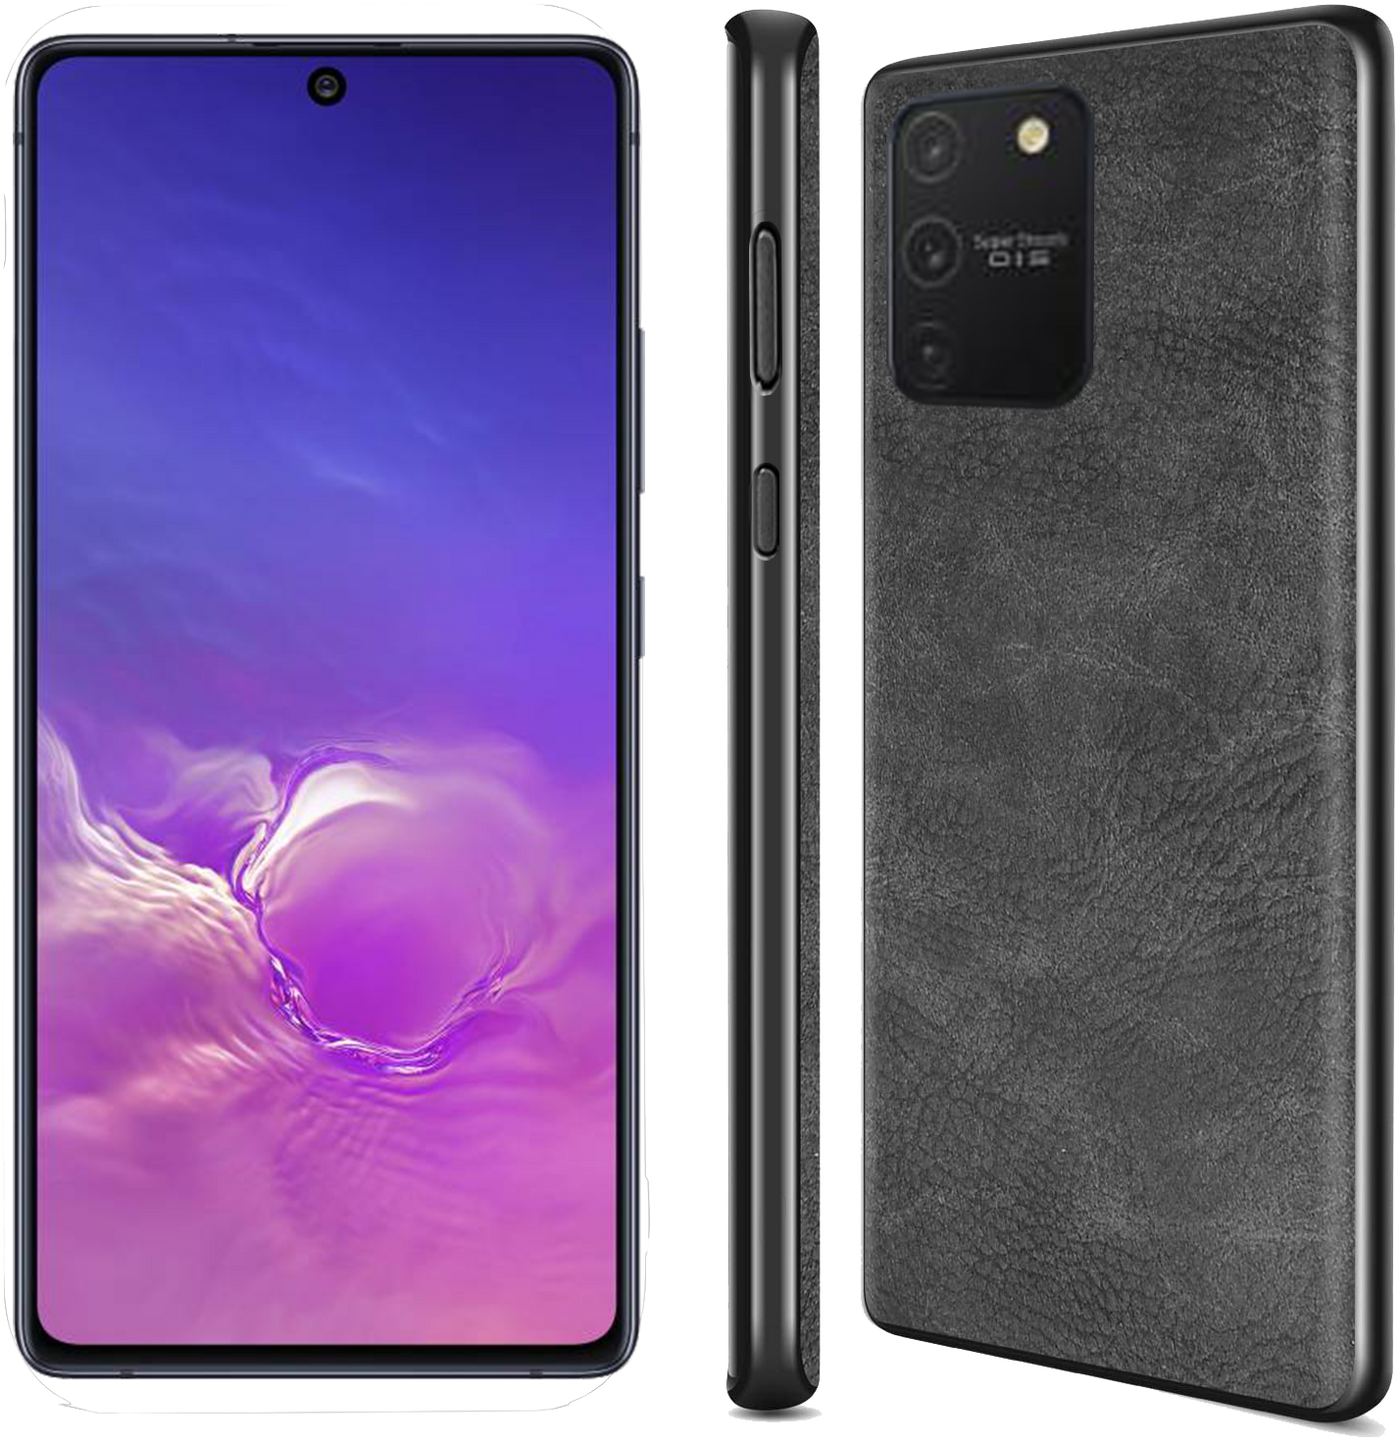 Excelsior Premium PU Leather Back Cover Case For Samsung Galaxy S10 Lite (2020)